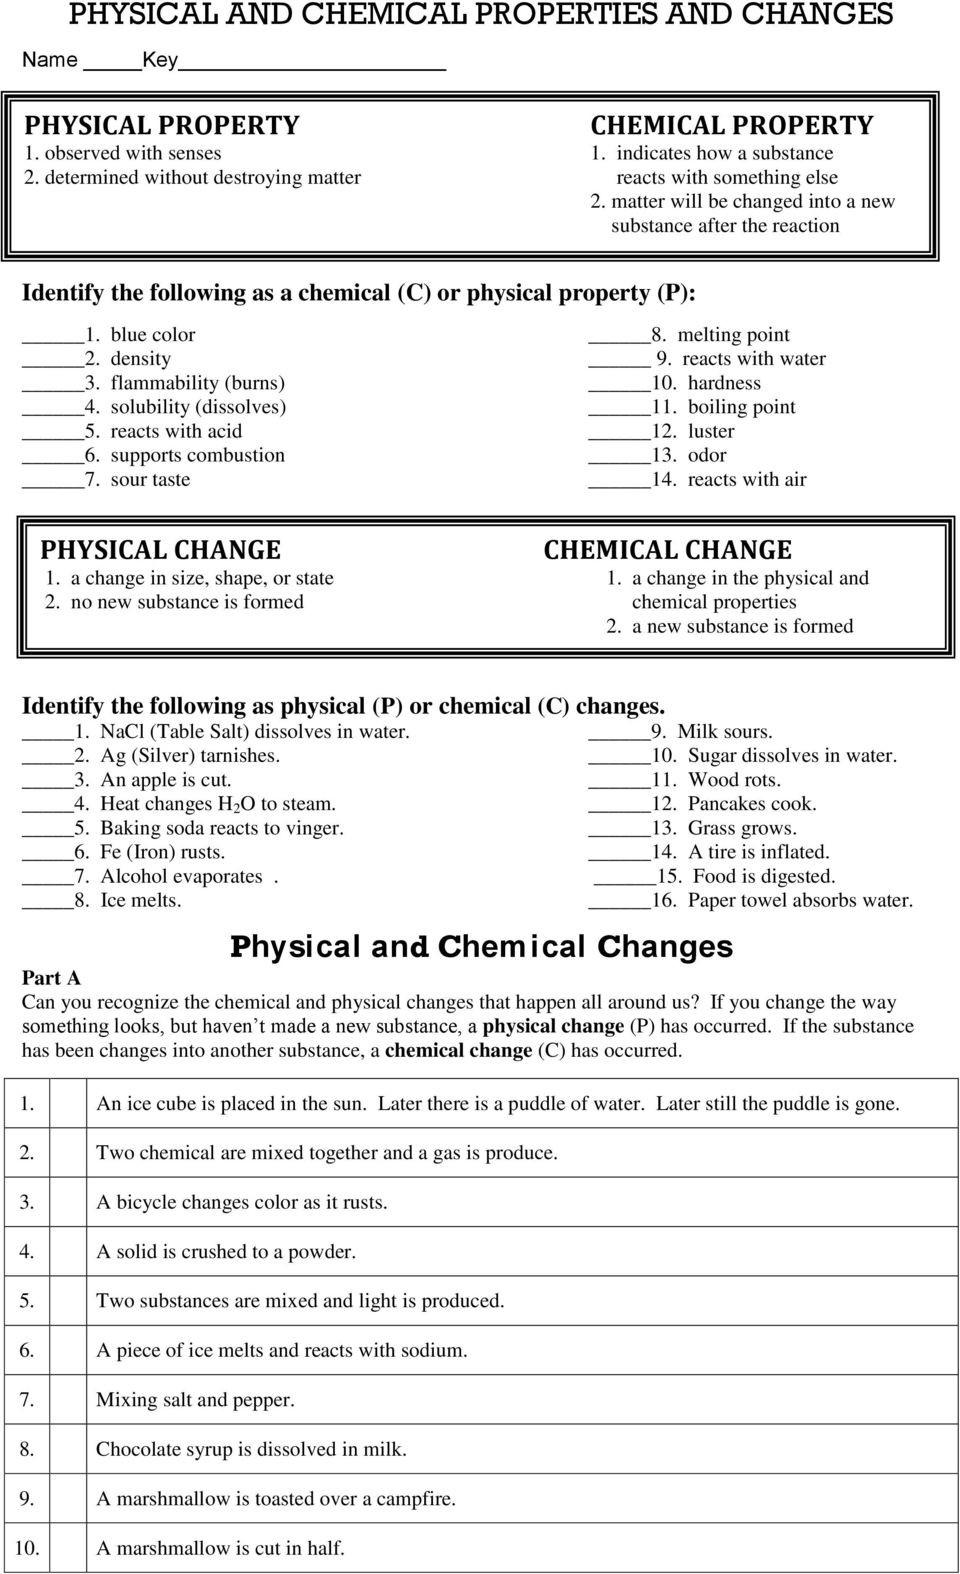 Chemical and Physical Changes Worksheet Physical and Chemical Properties and Changes Pdf Free Download